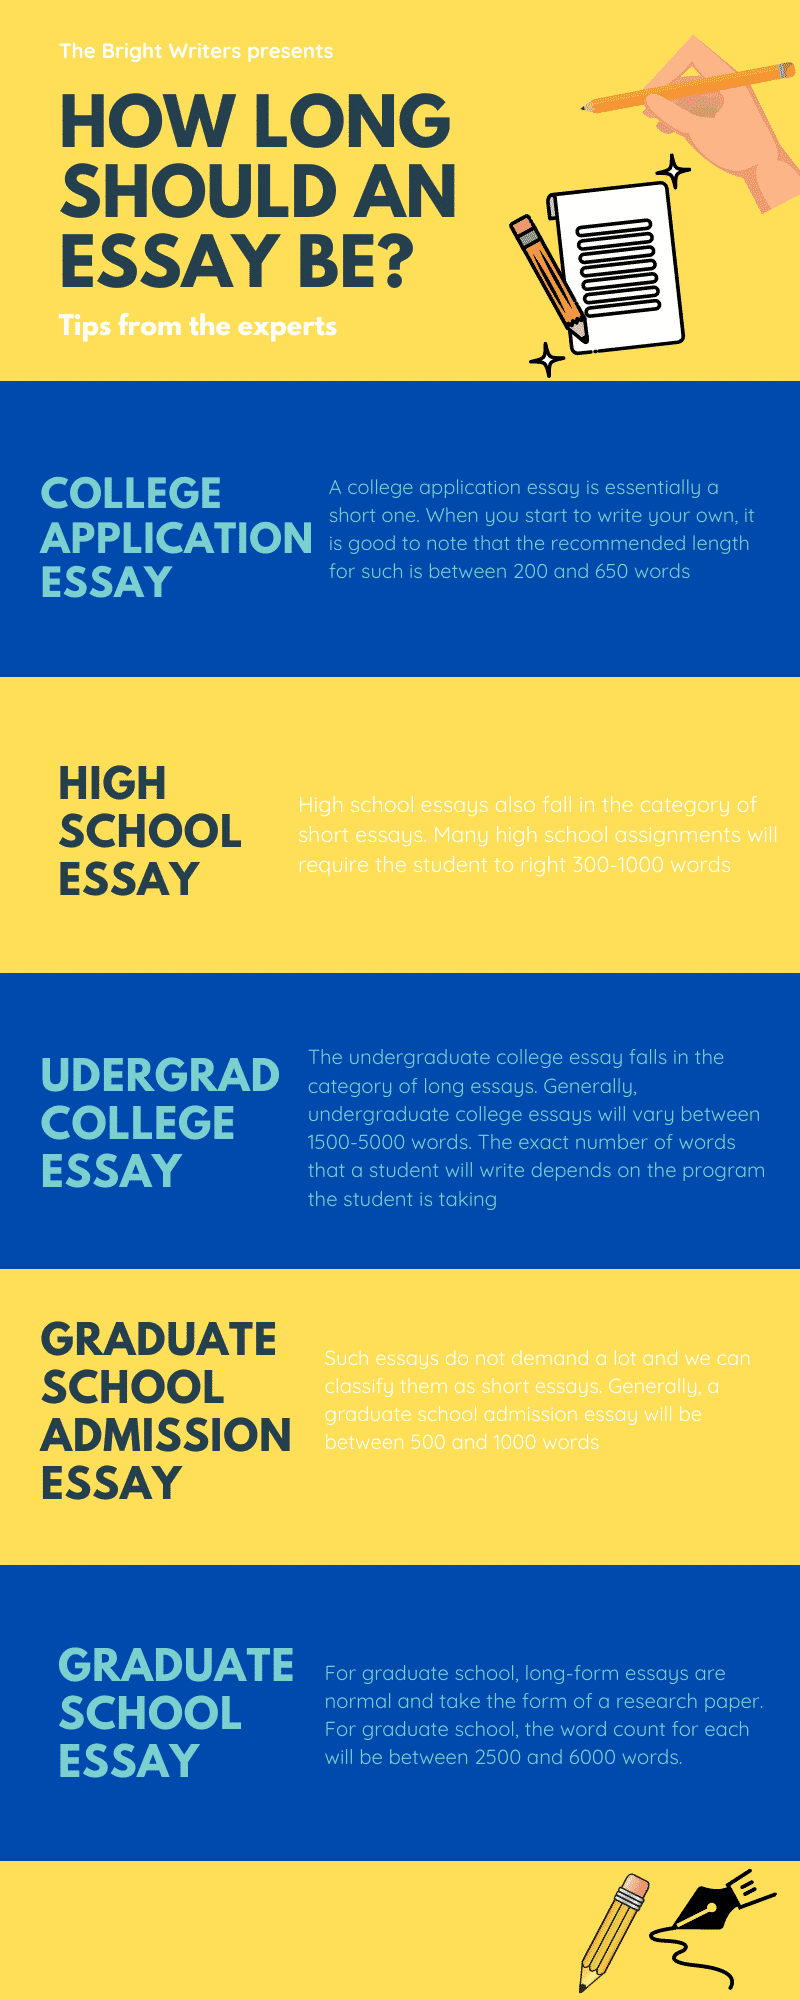 How Long Should An Essay Be? 